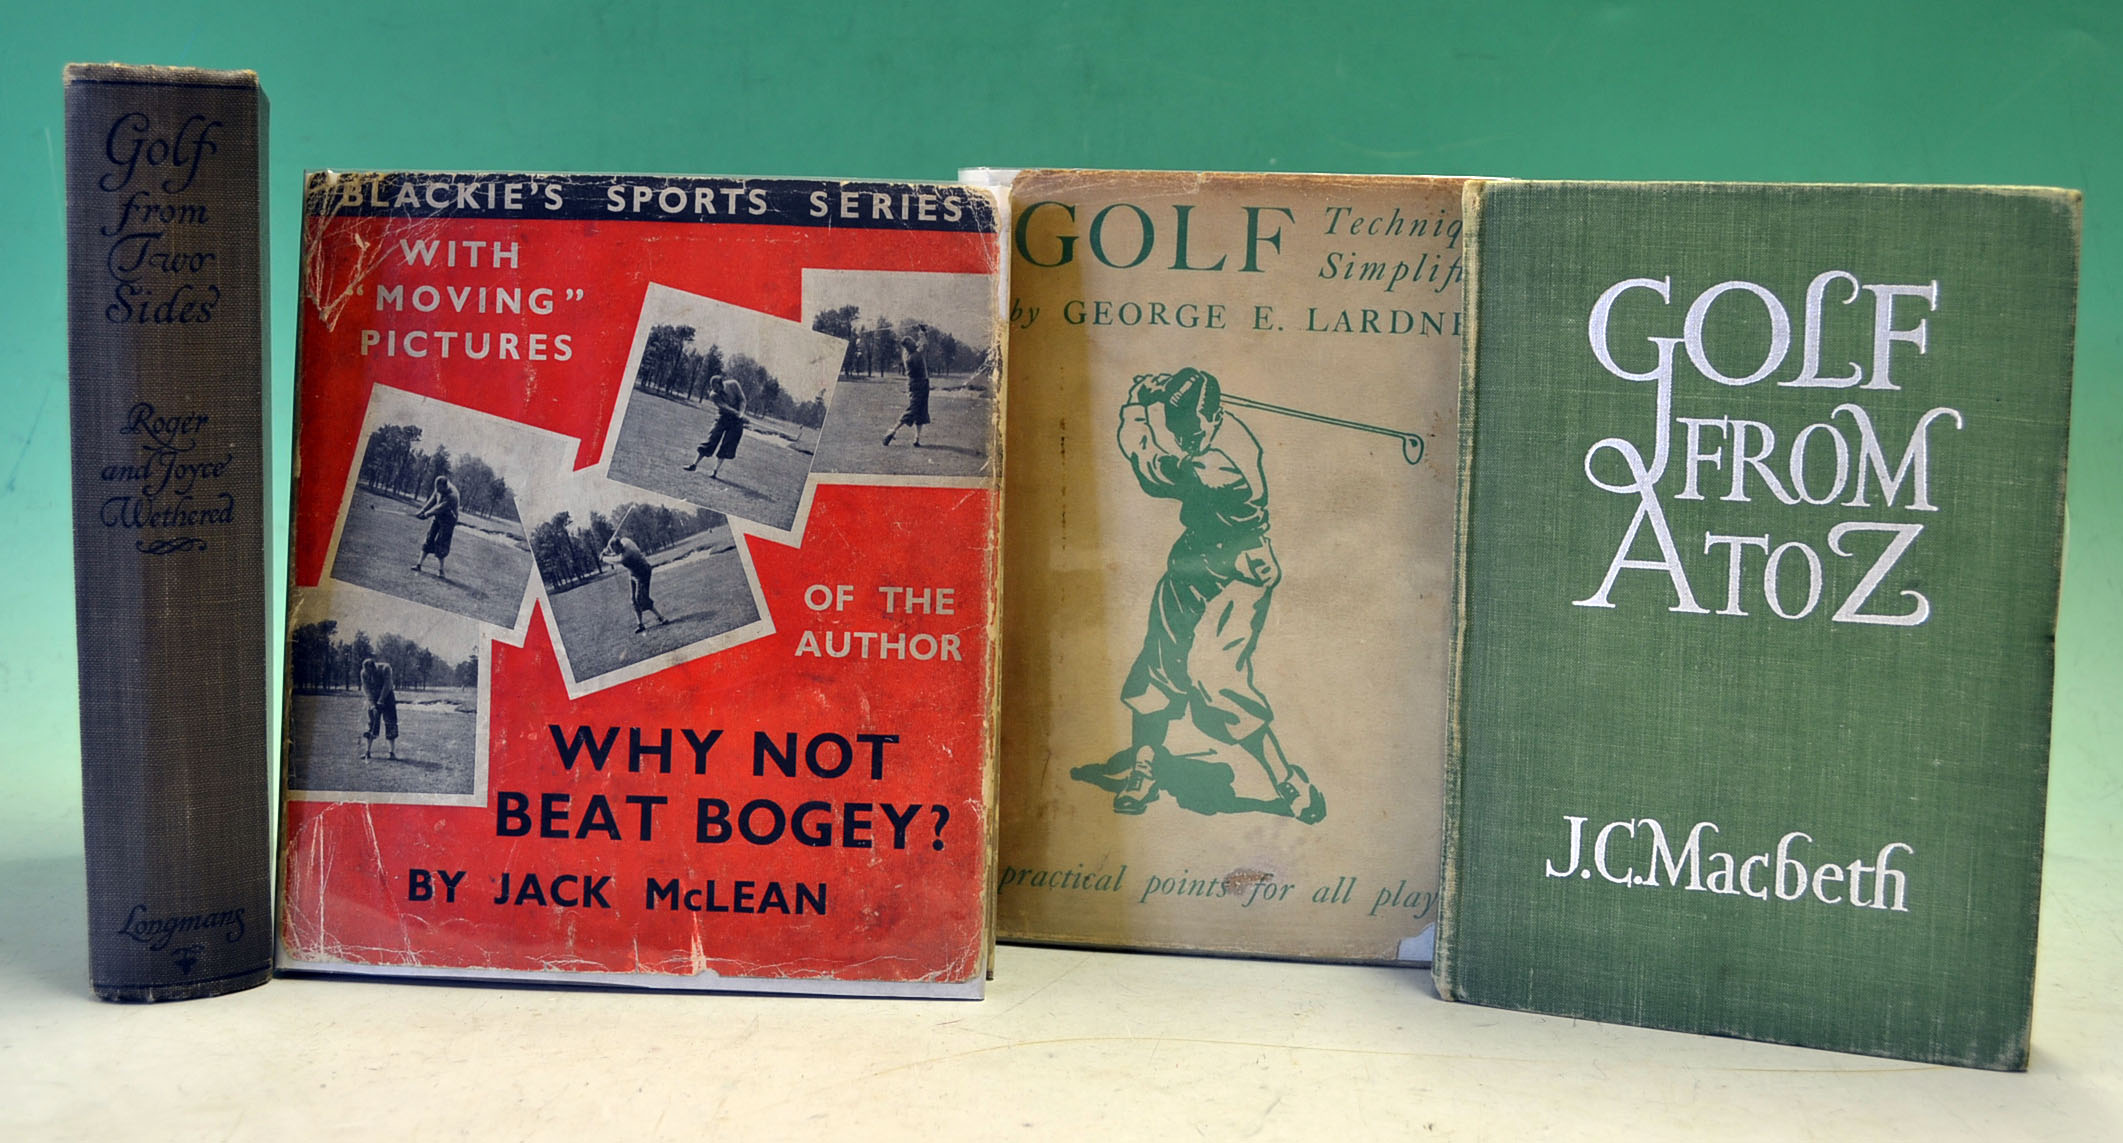 Early Golf Instruction books from 1920s (4) to incl J C Macbeth “Golf From A to Z" 1st ed 1935